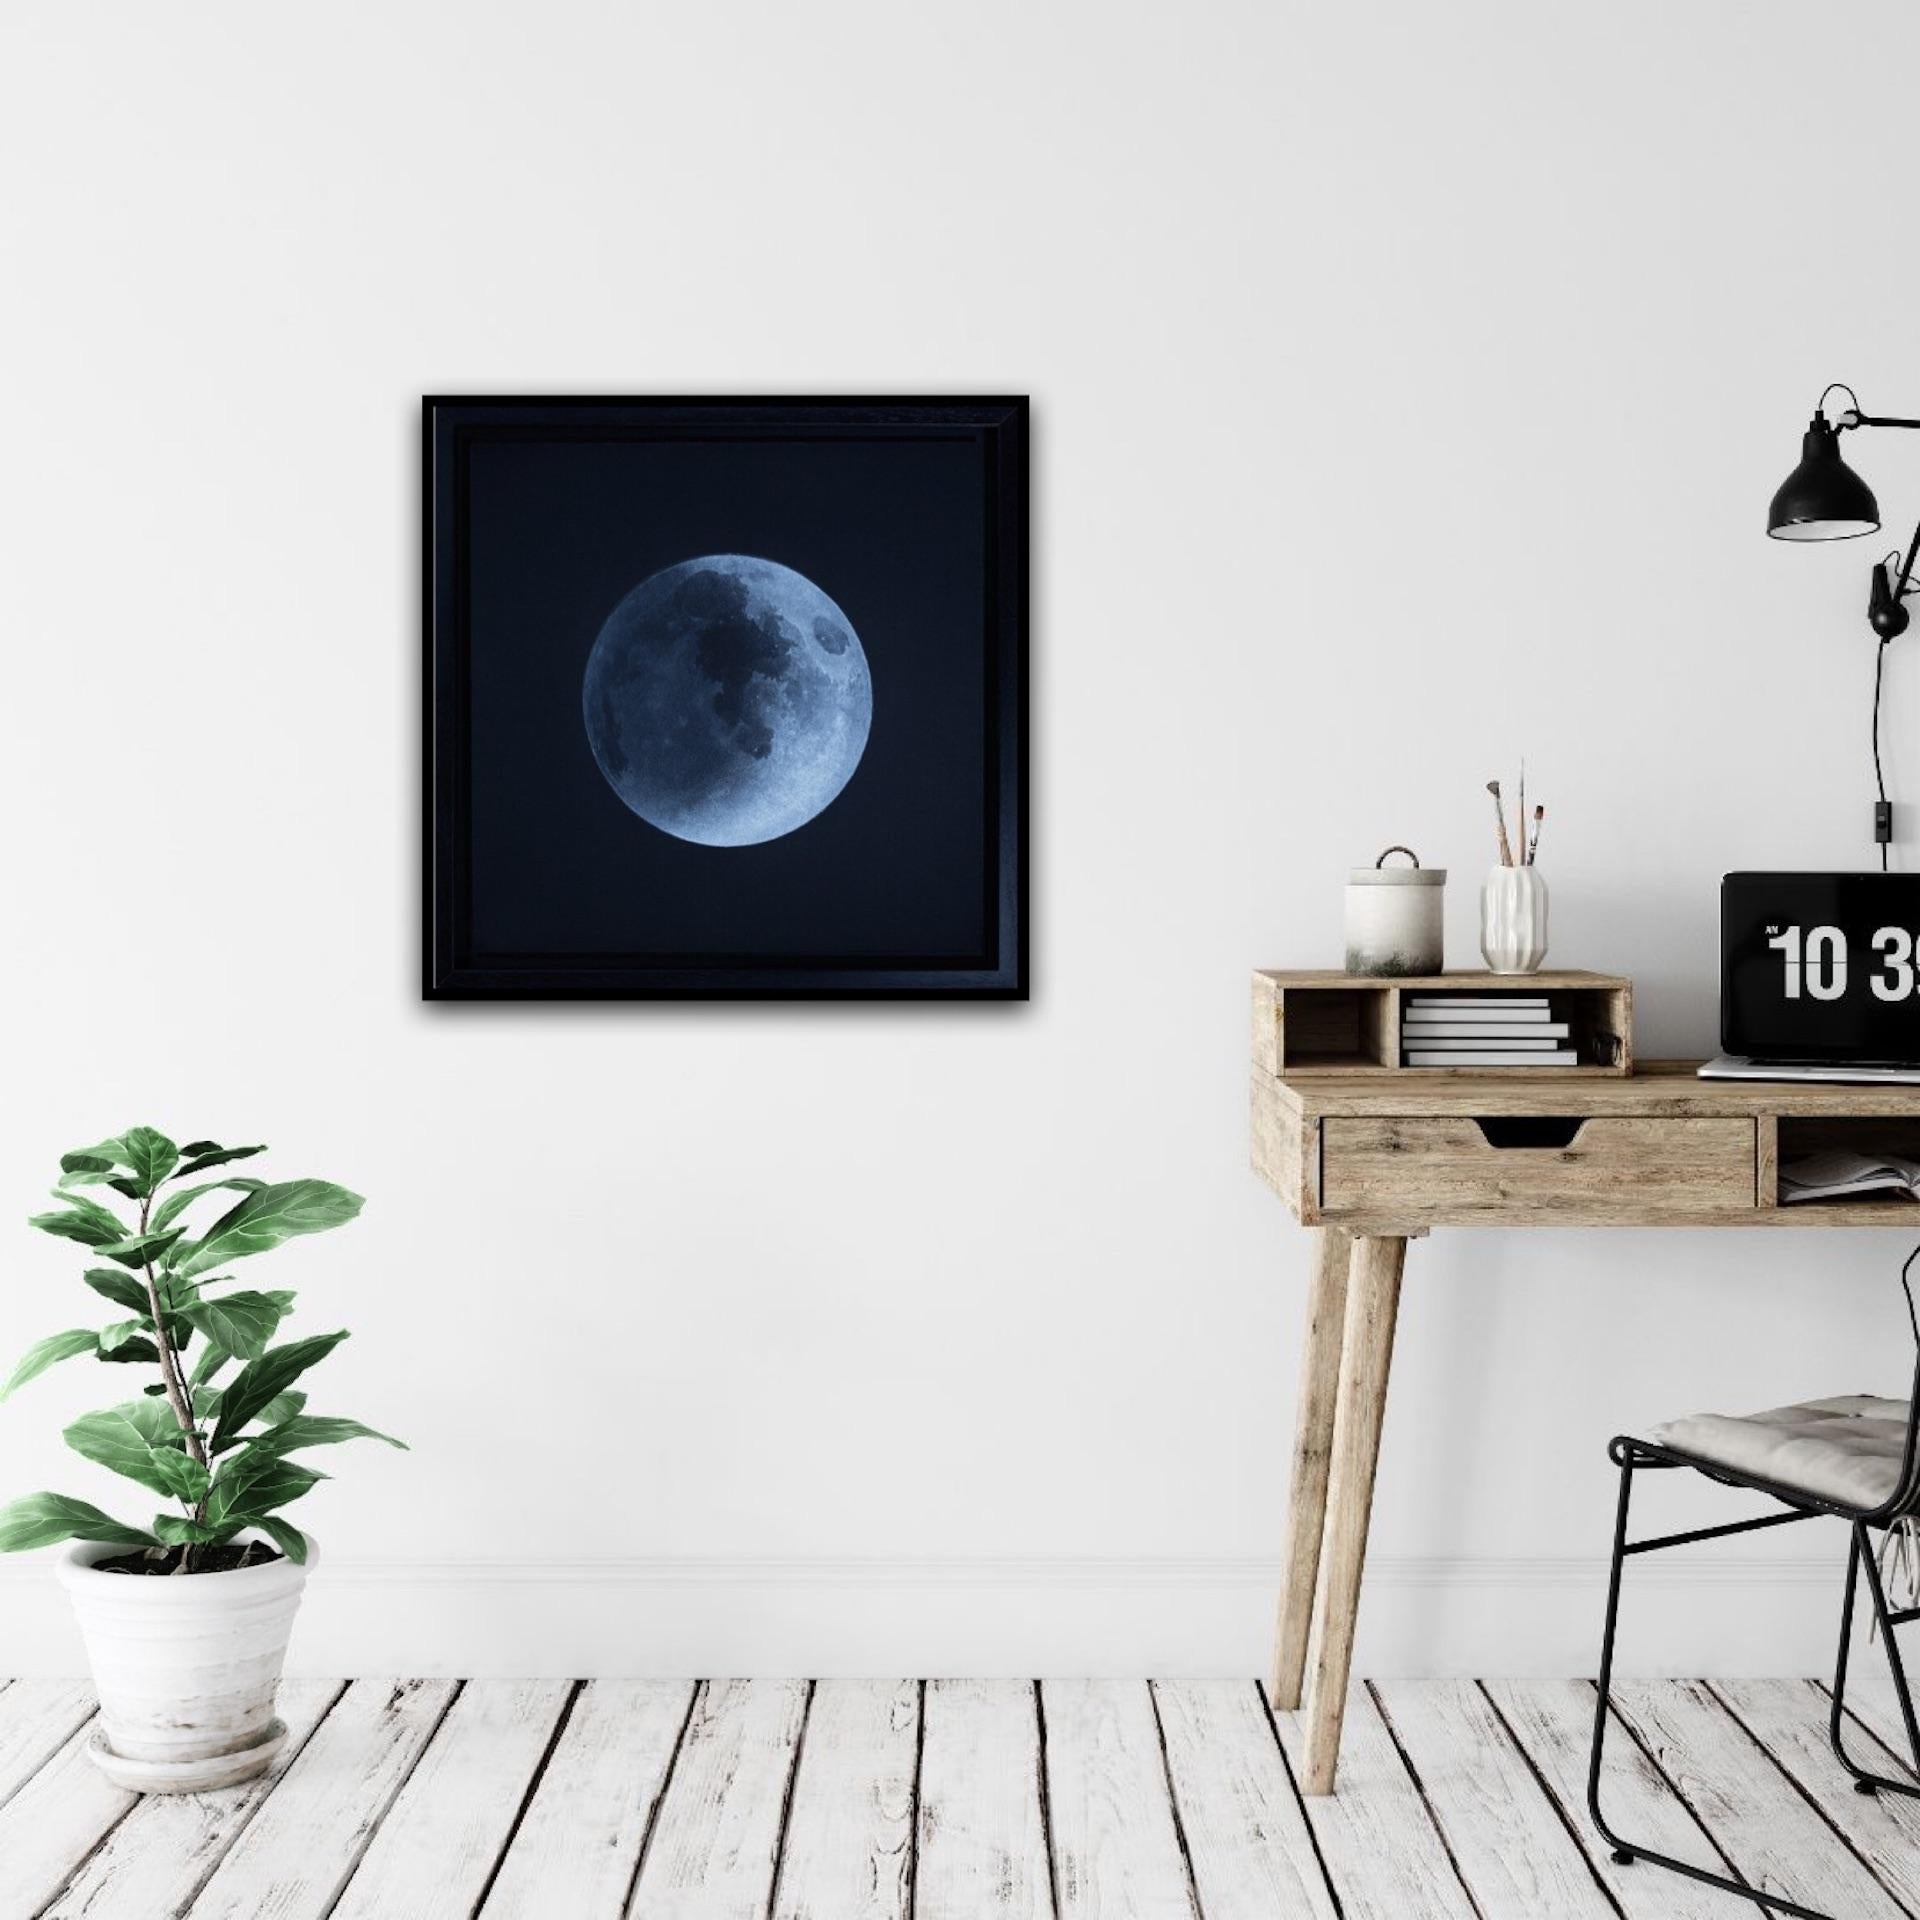 Waxing Crescent (The Moon Series) by Guy Allen [2020]
limited_edition

Etching on paper

Edition number 75

Image size: H:51 cm x W:51 cm

Complete Size of Unframed Work: H:51 cm x W:51 cm x D:0.1cm

Sold Unframed

Please note that insitu images are